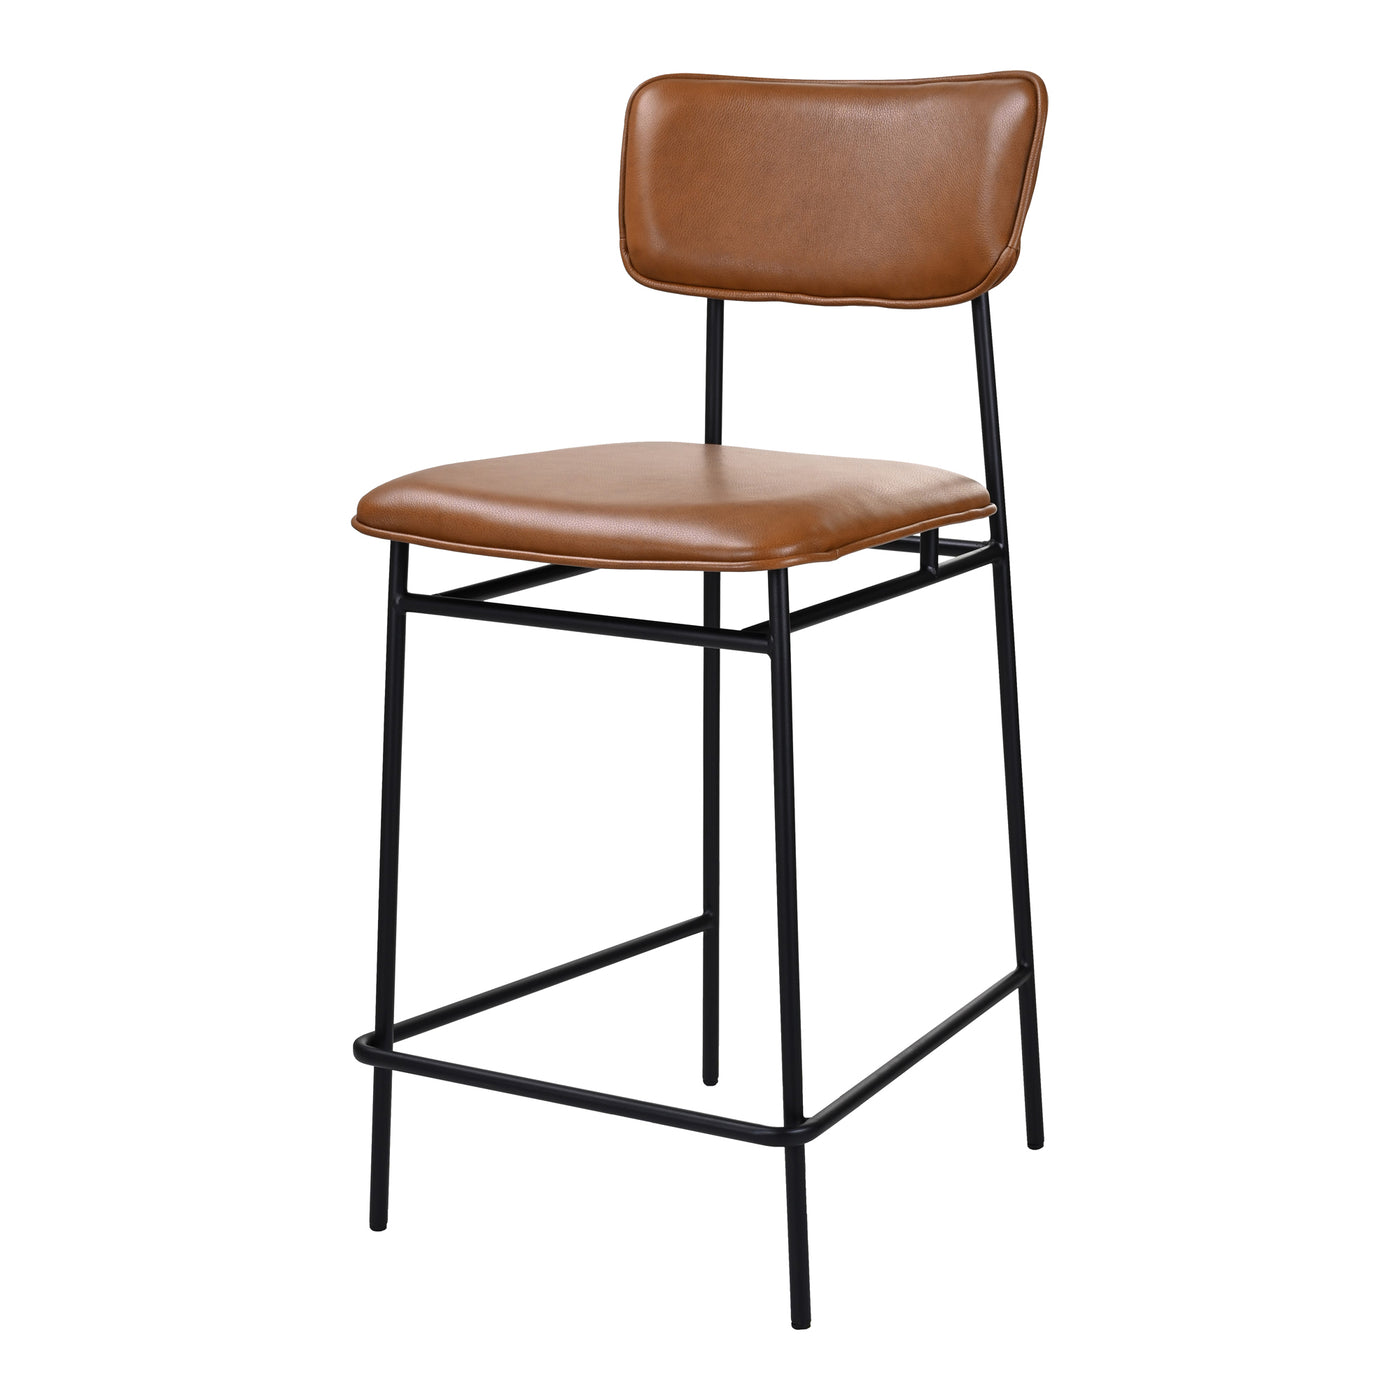 Here to upgrade your space with a purely modern design, the Sailor counter stool features a slender iron frame, comfortabl...